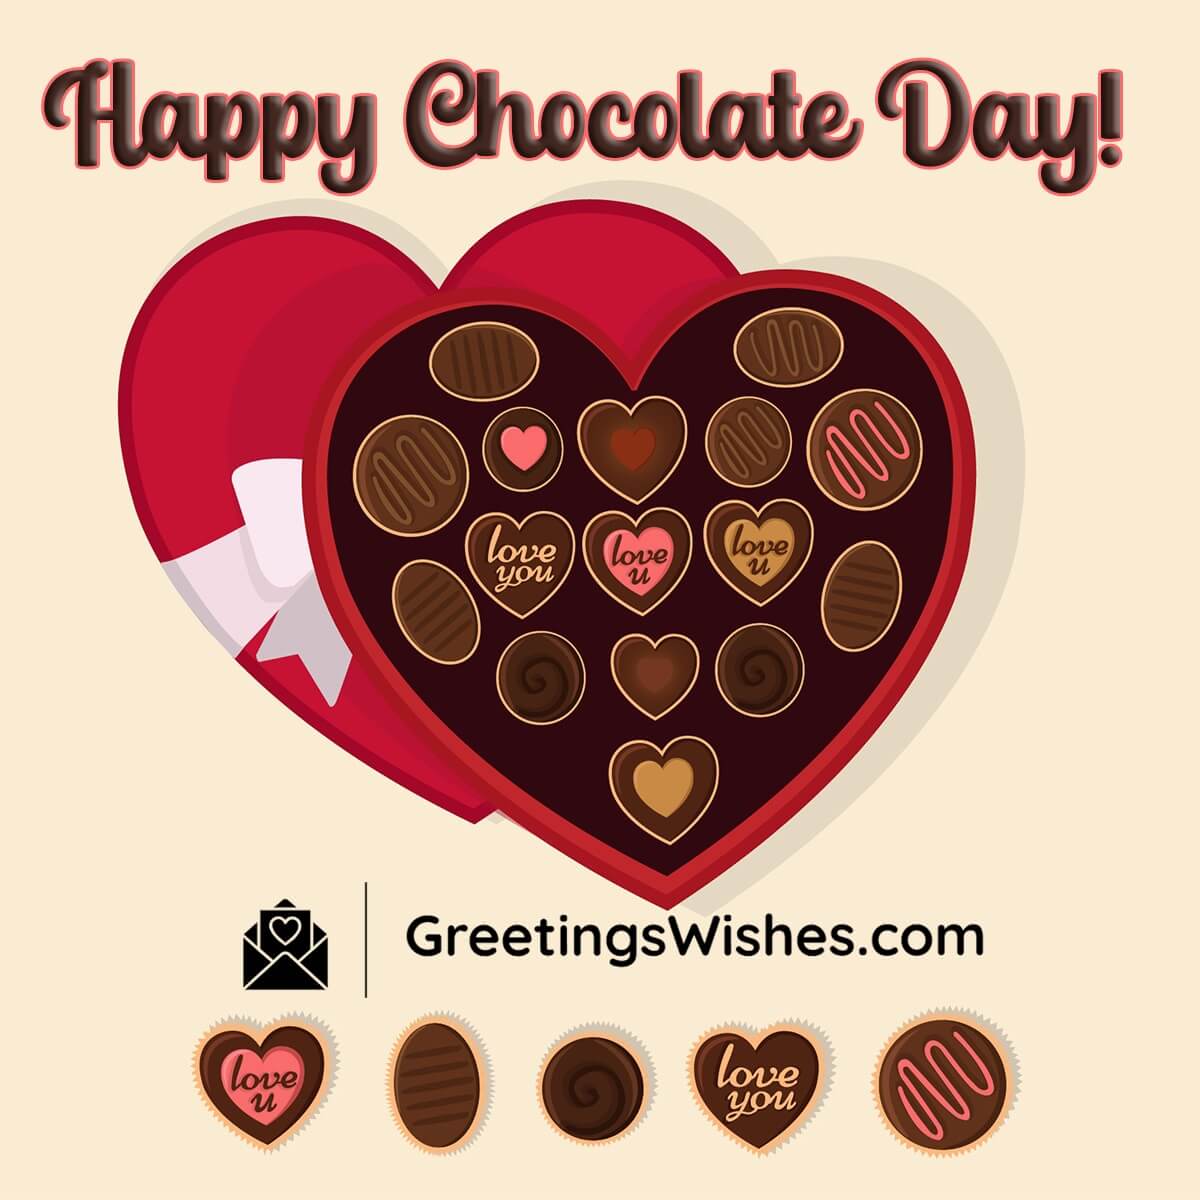 Happy Chocolate Day Card